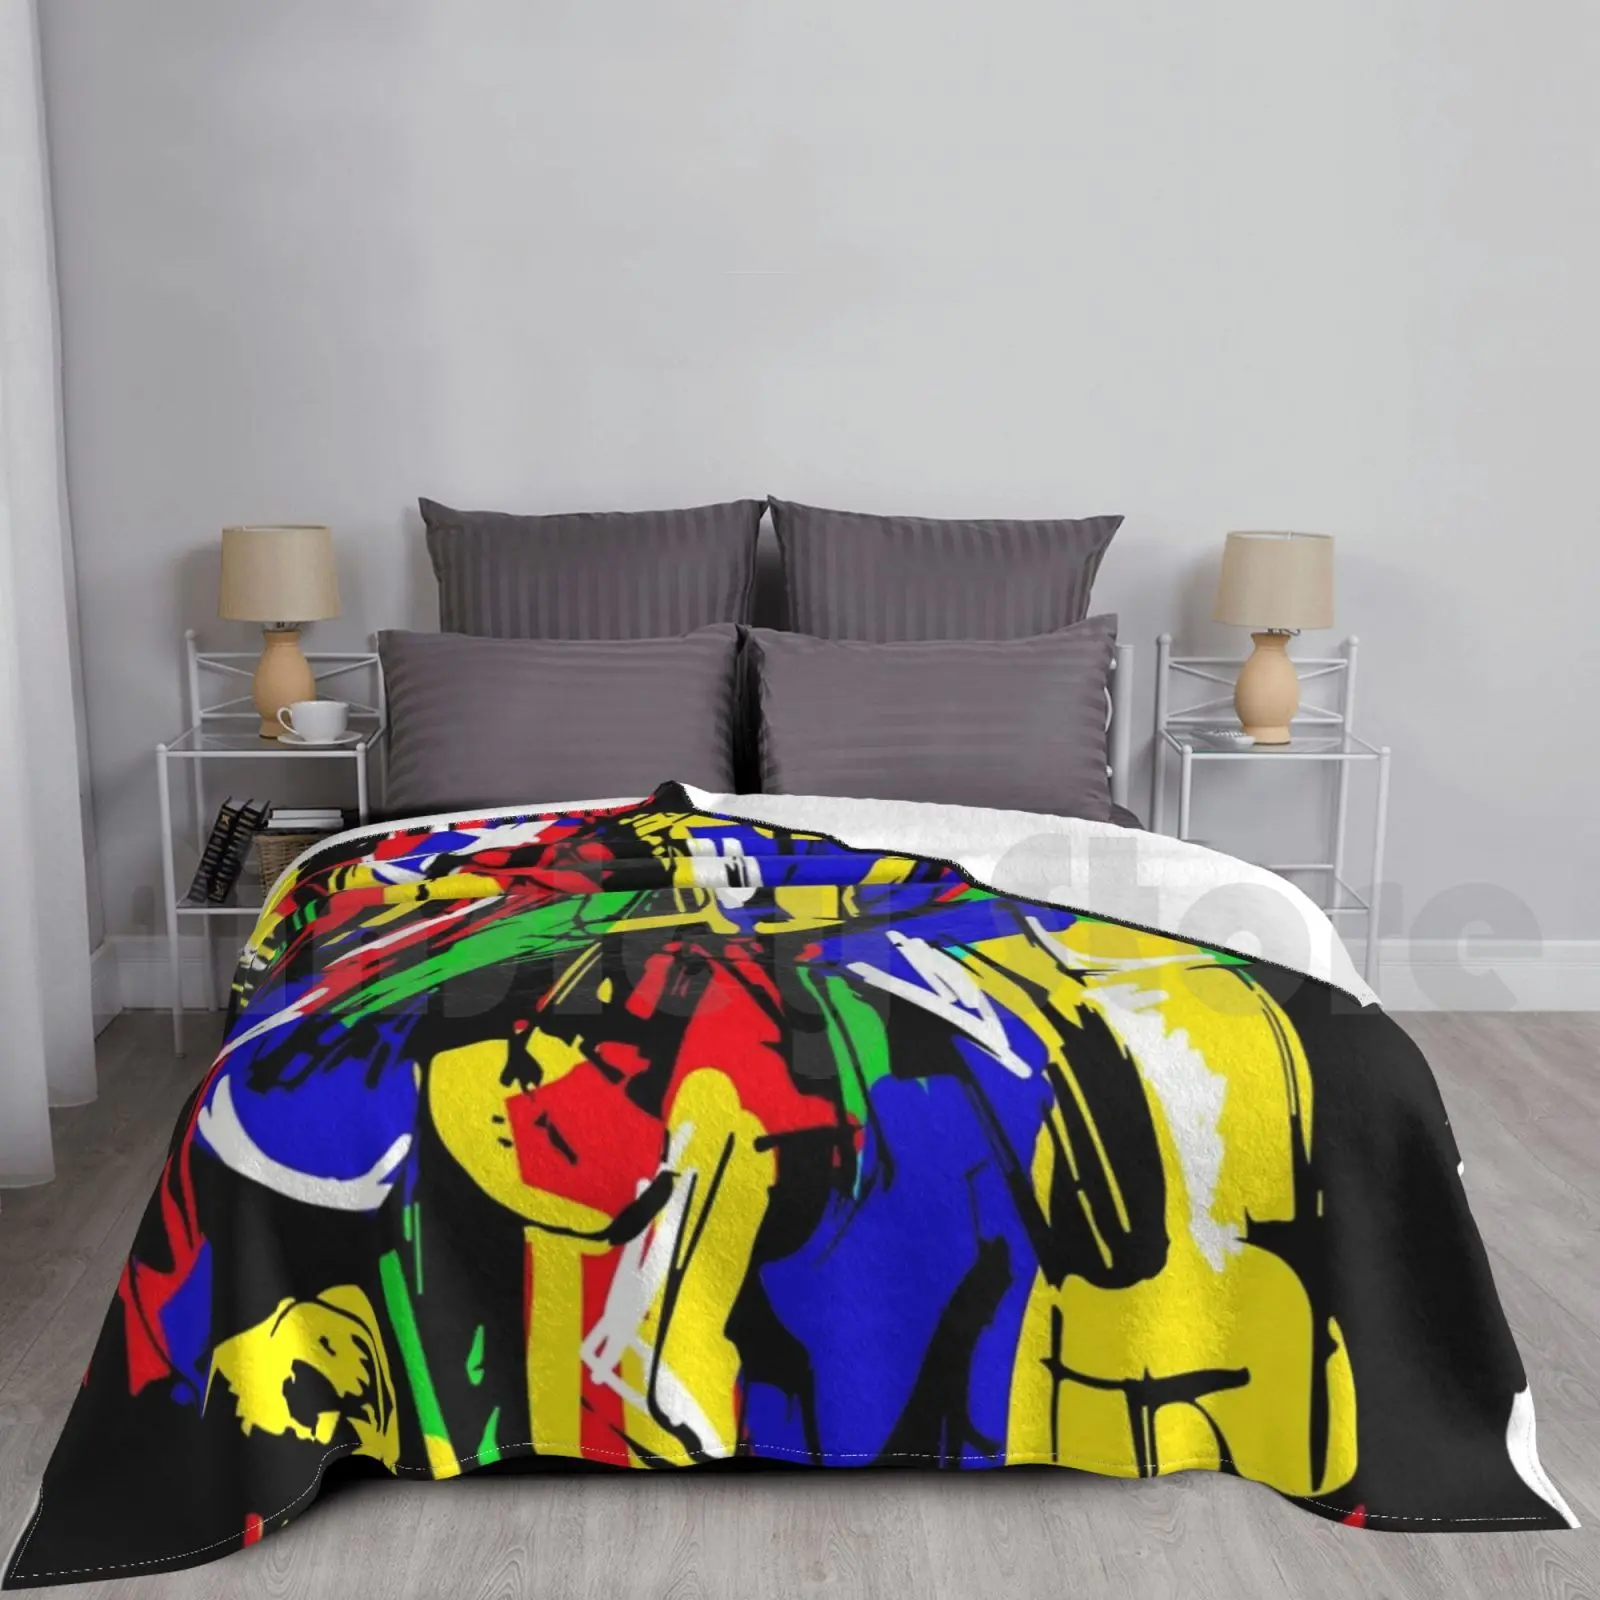 

Stairs Blanket Fashion Custom Colorful Black Appropriation Art